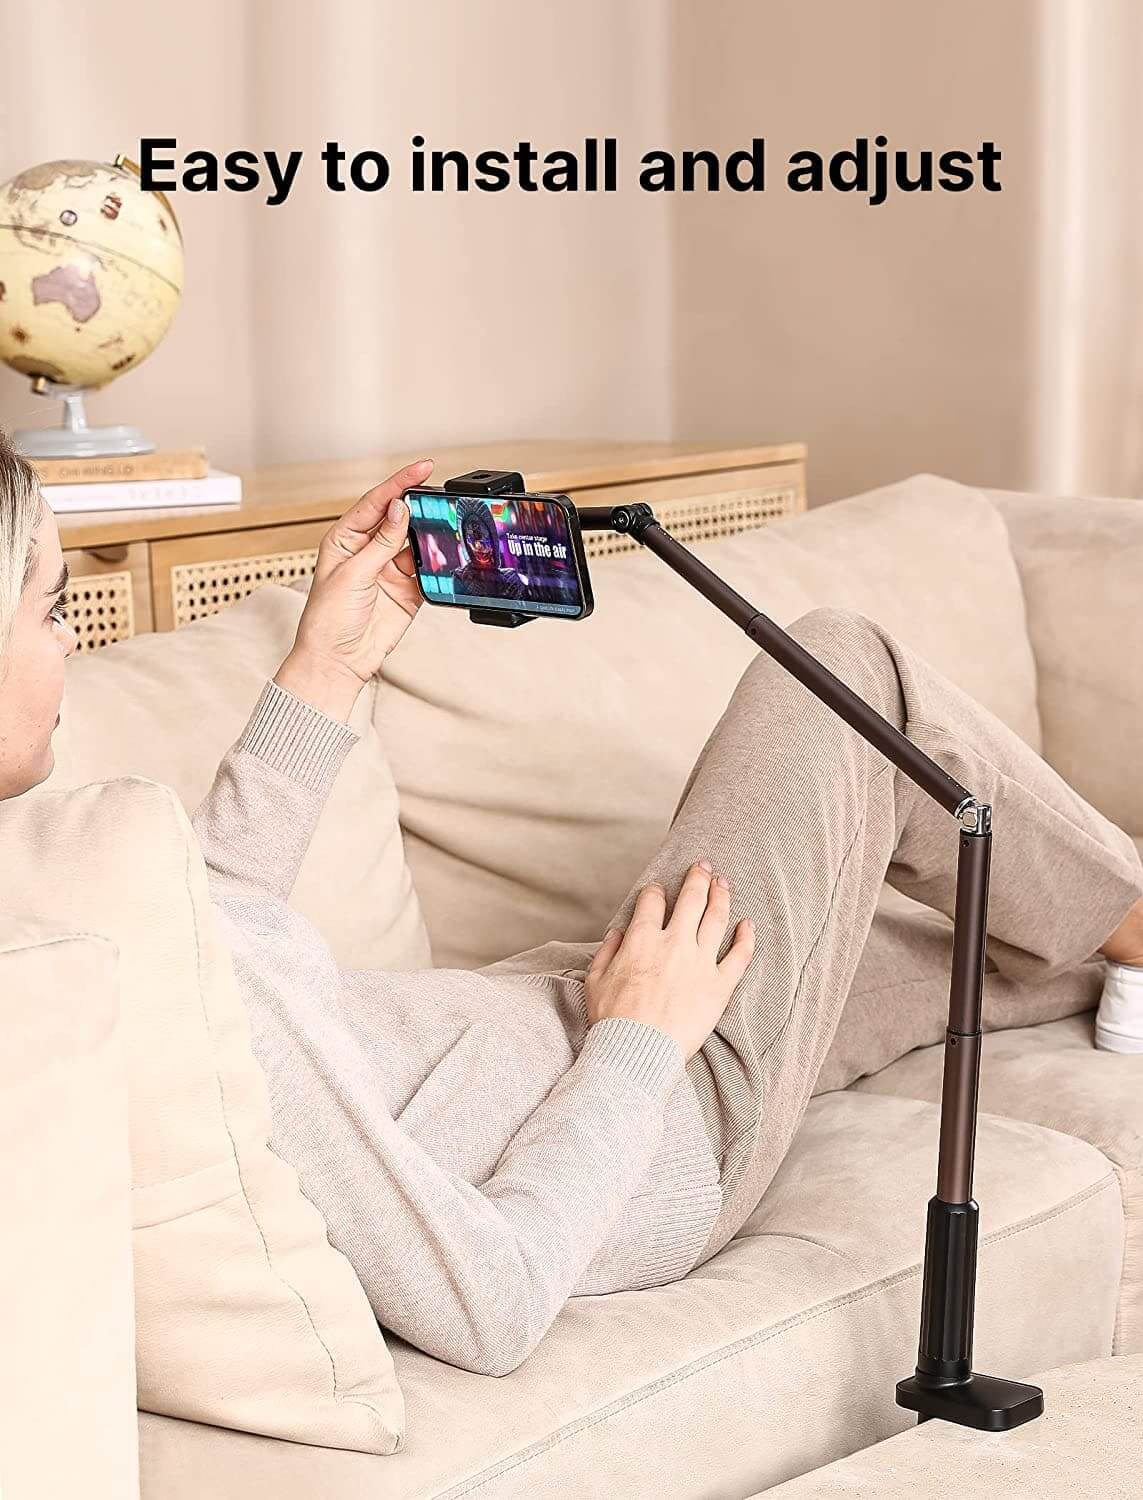 flexible_lazy_long_arm_phone_holder_hands_free_black#style_for iphone (5 parts)